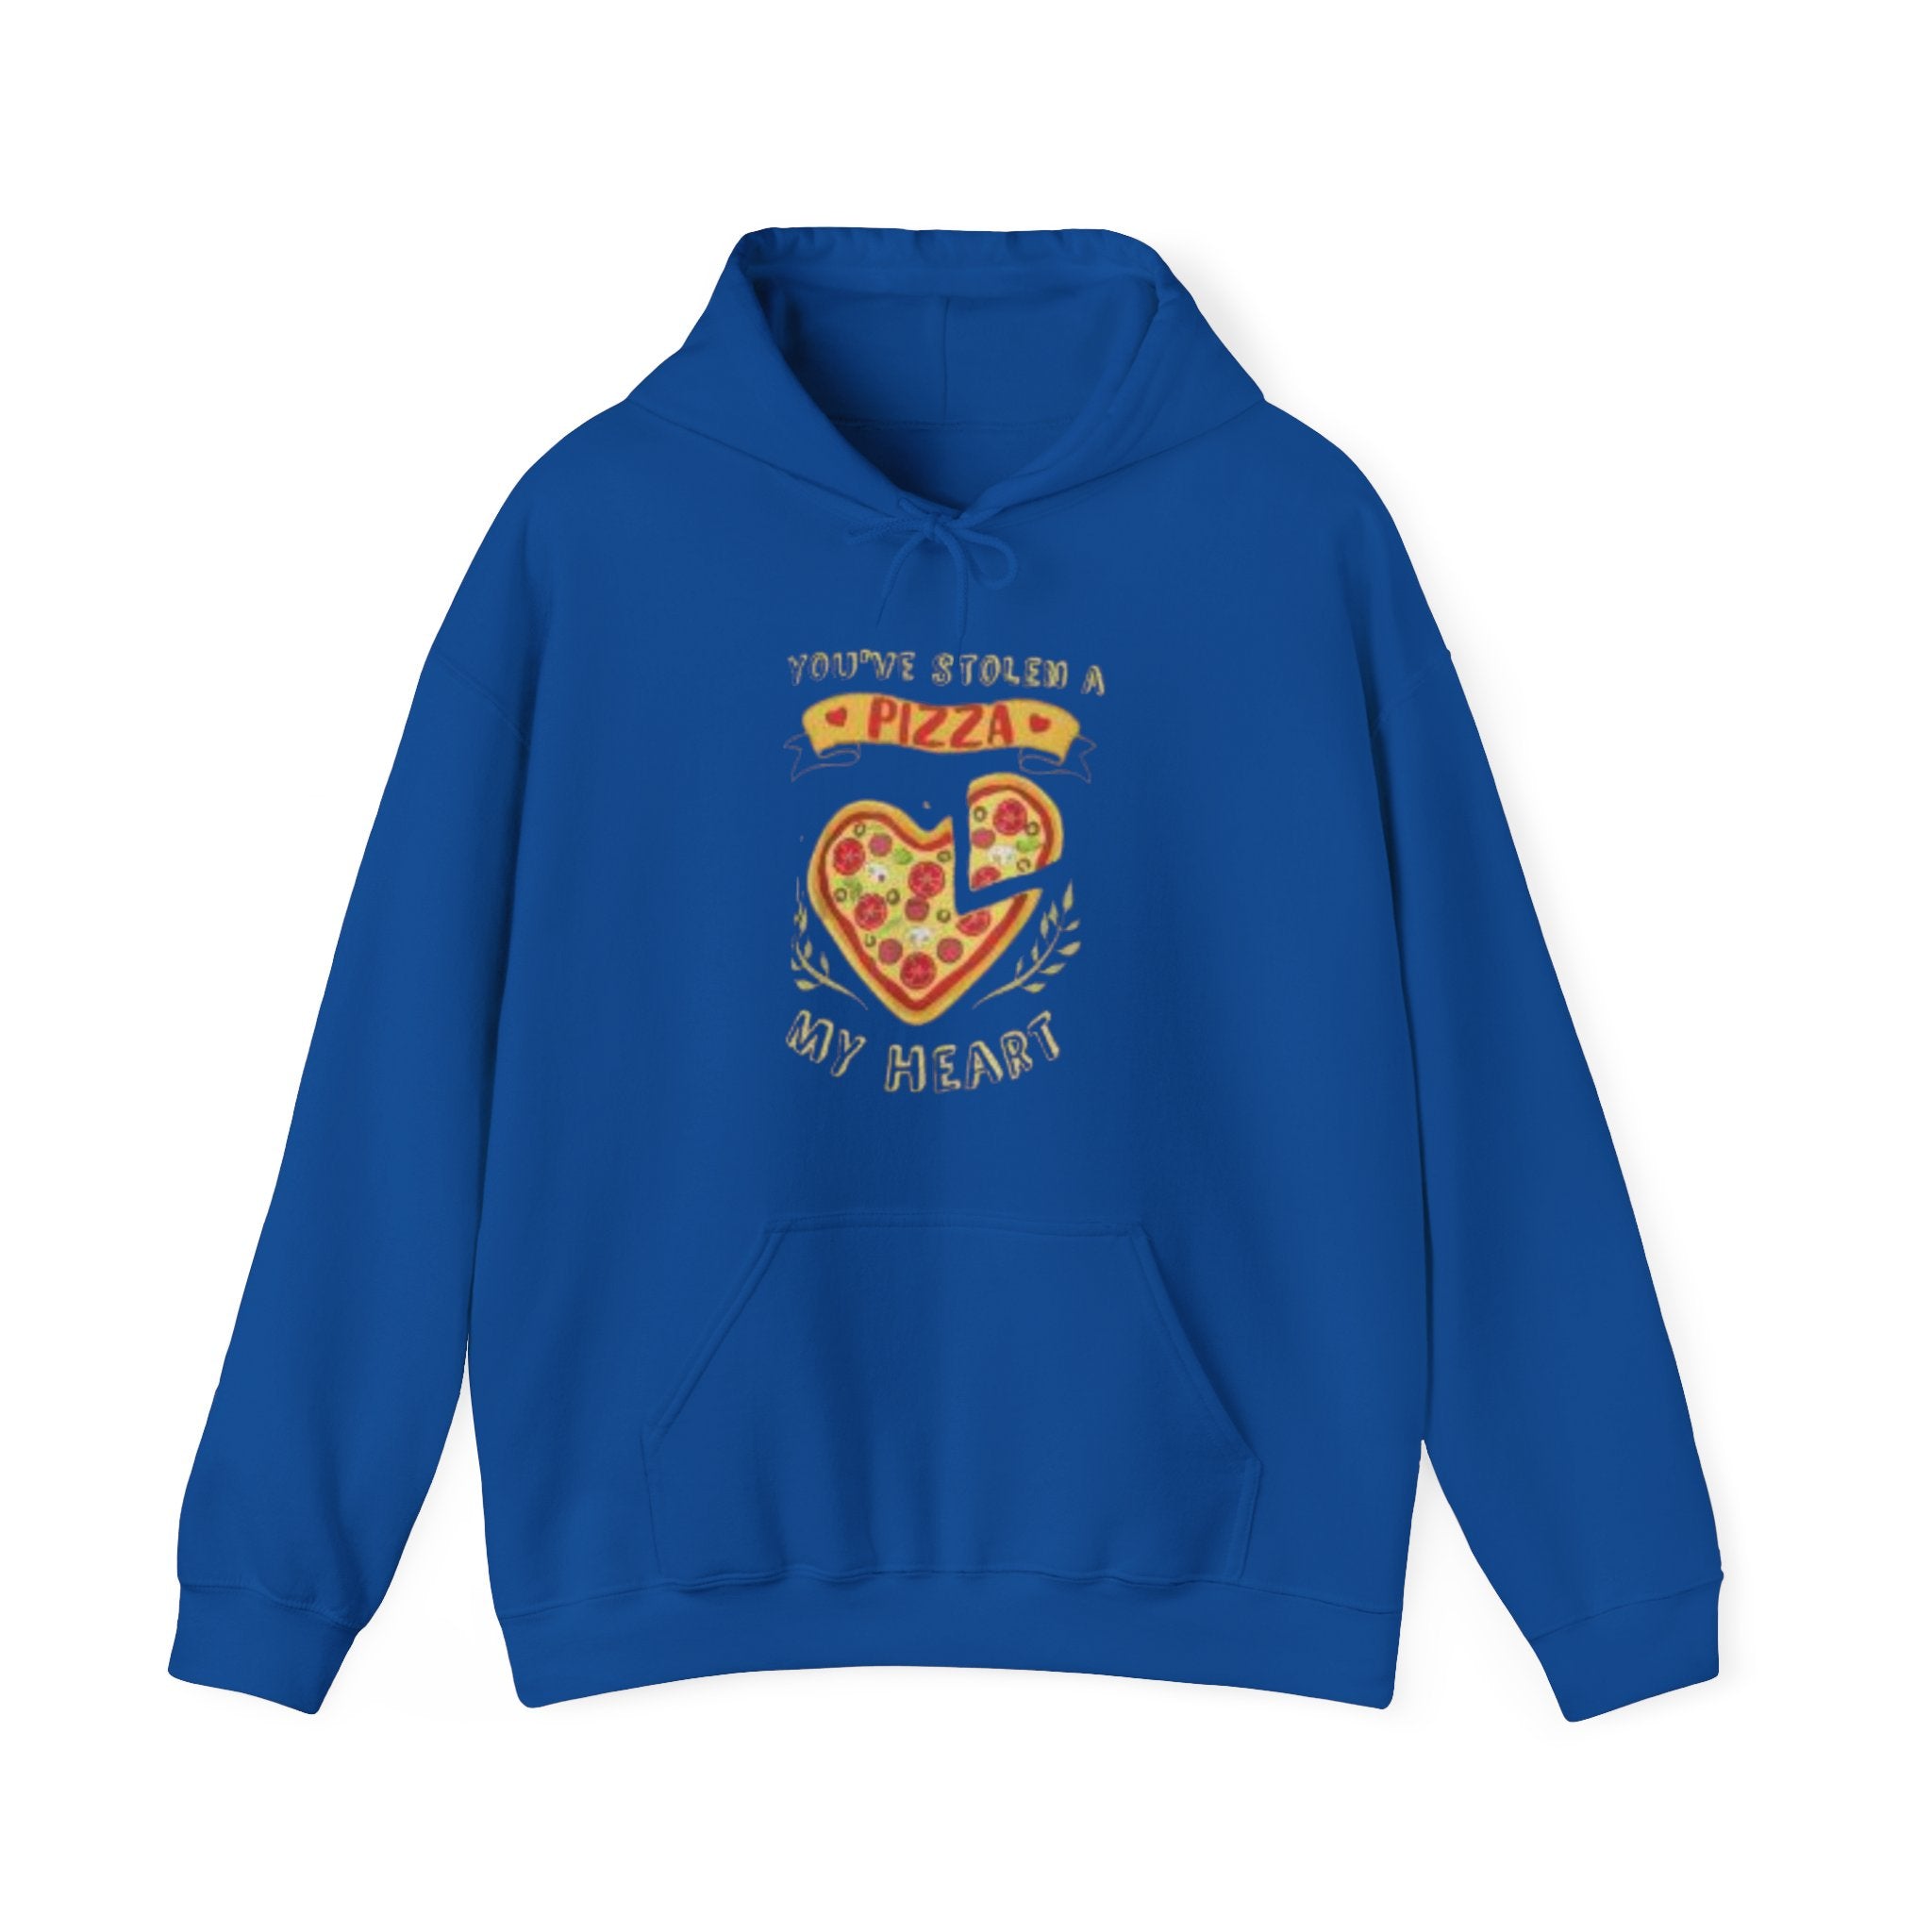 You've Stolen A Pizza My Heart Hoodie